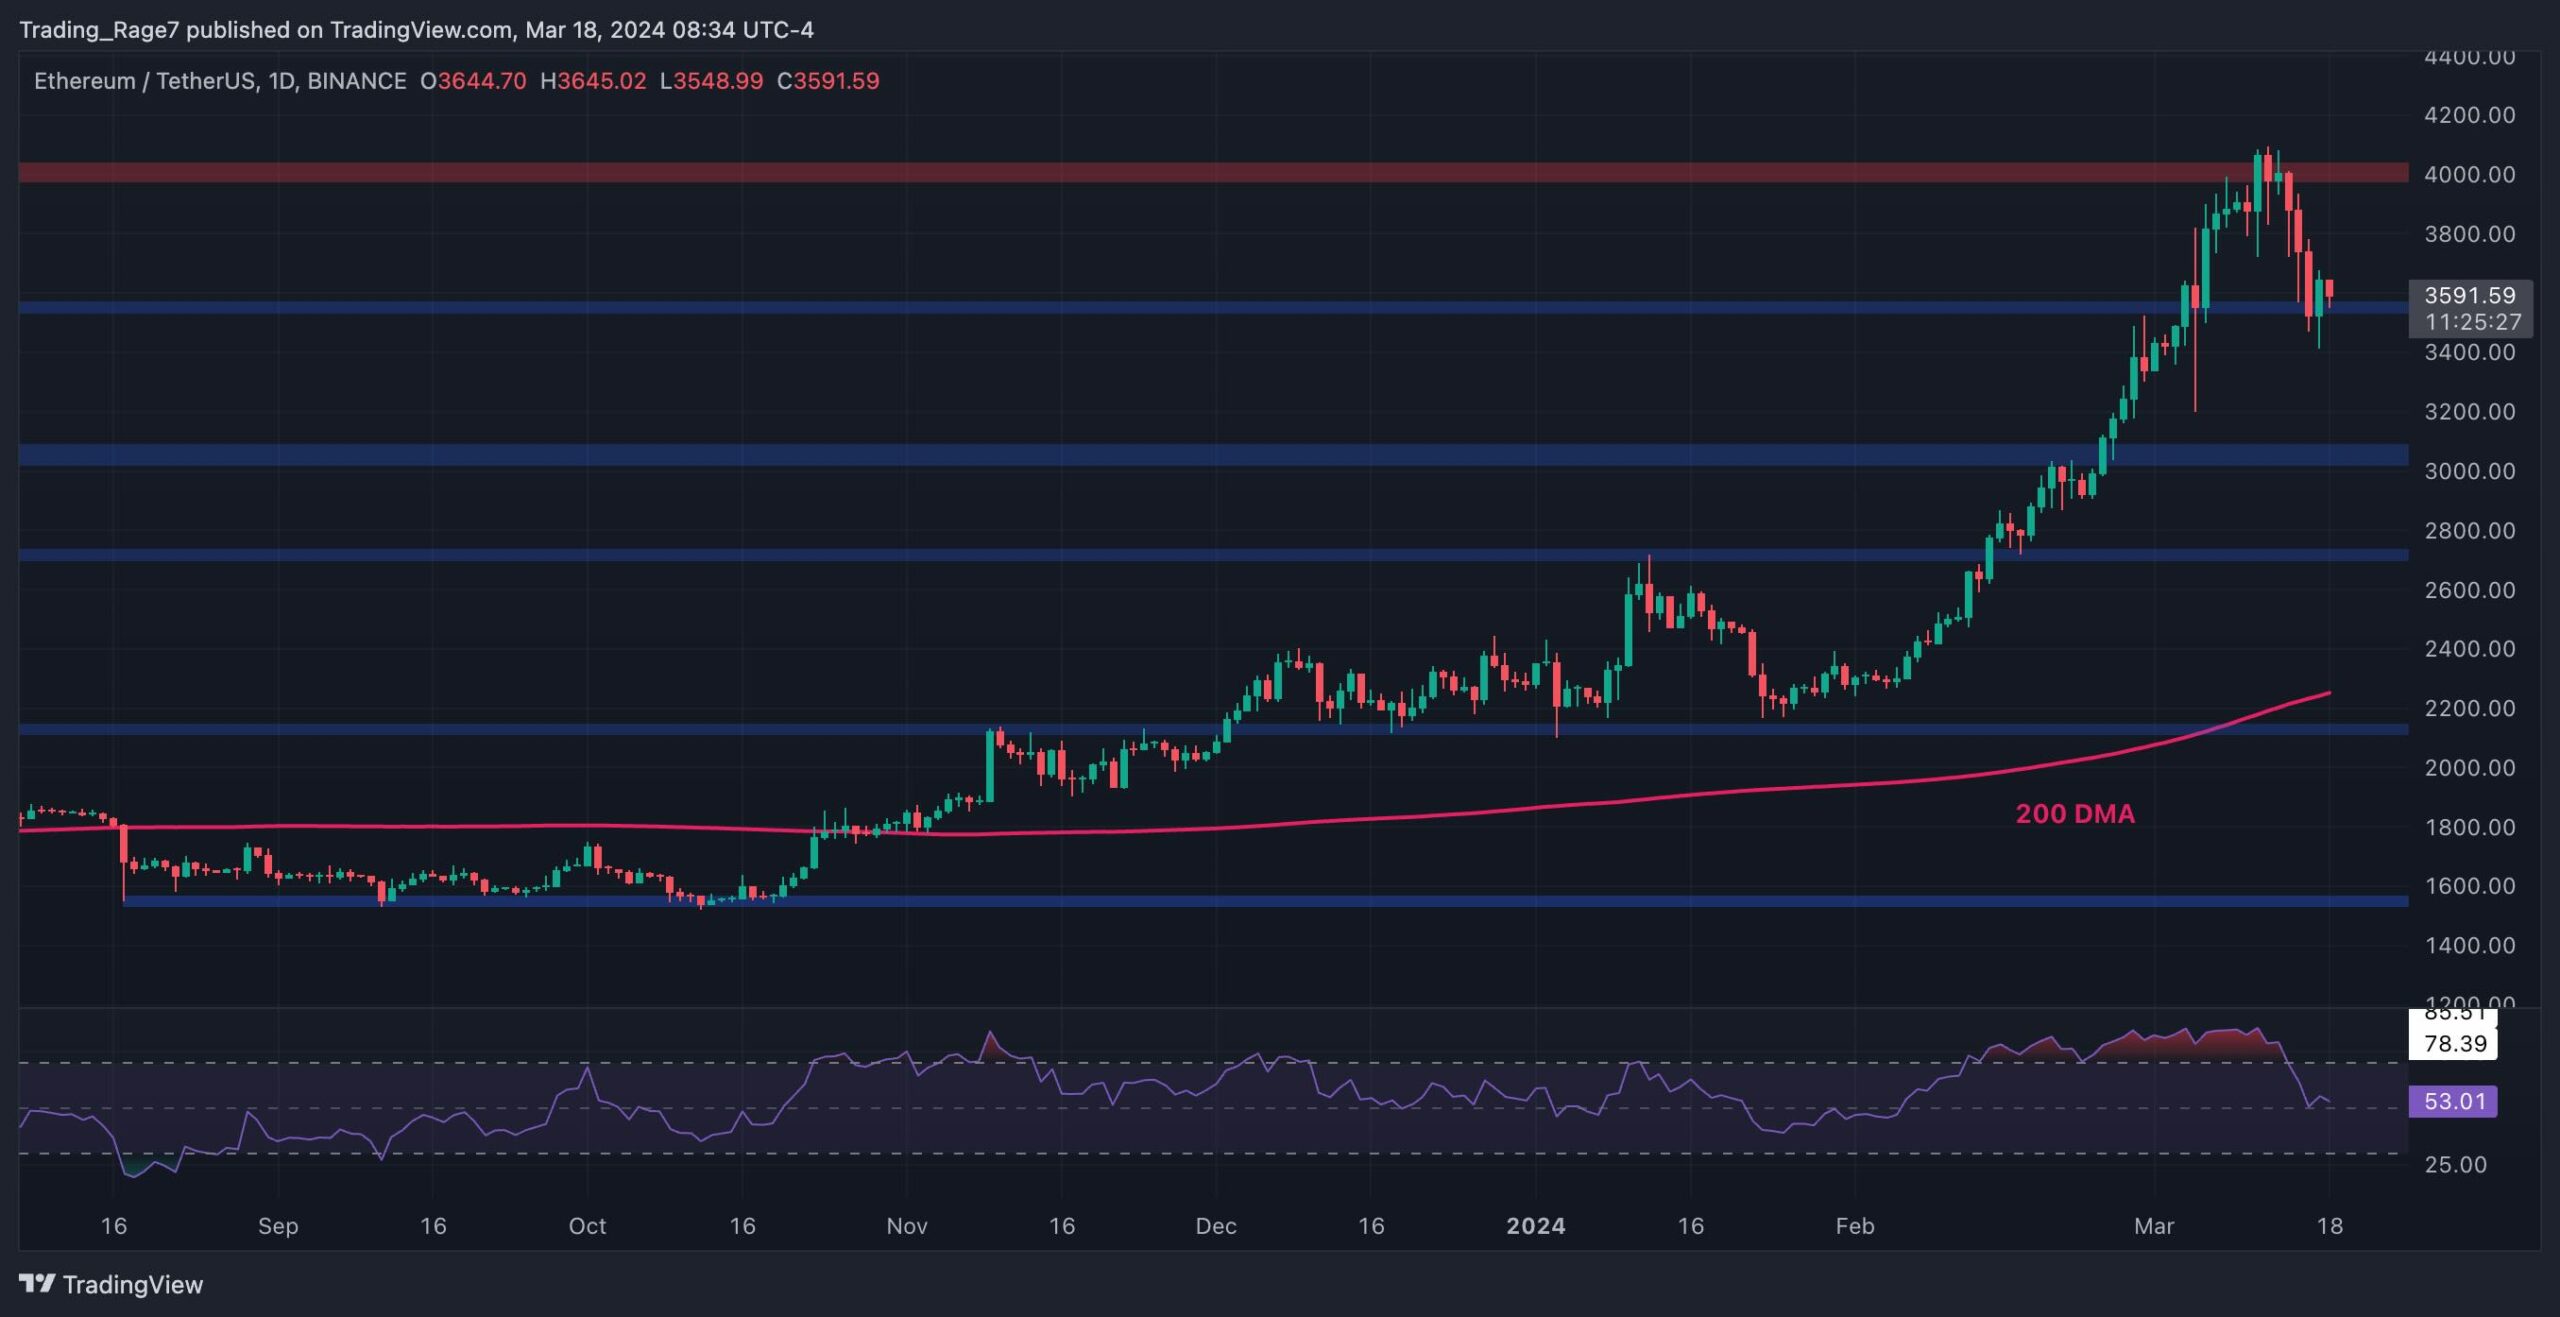 What Will Come First for ETH: $3,000 or $4,000? (Ethereum Price Analysis)